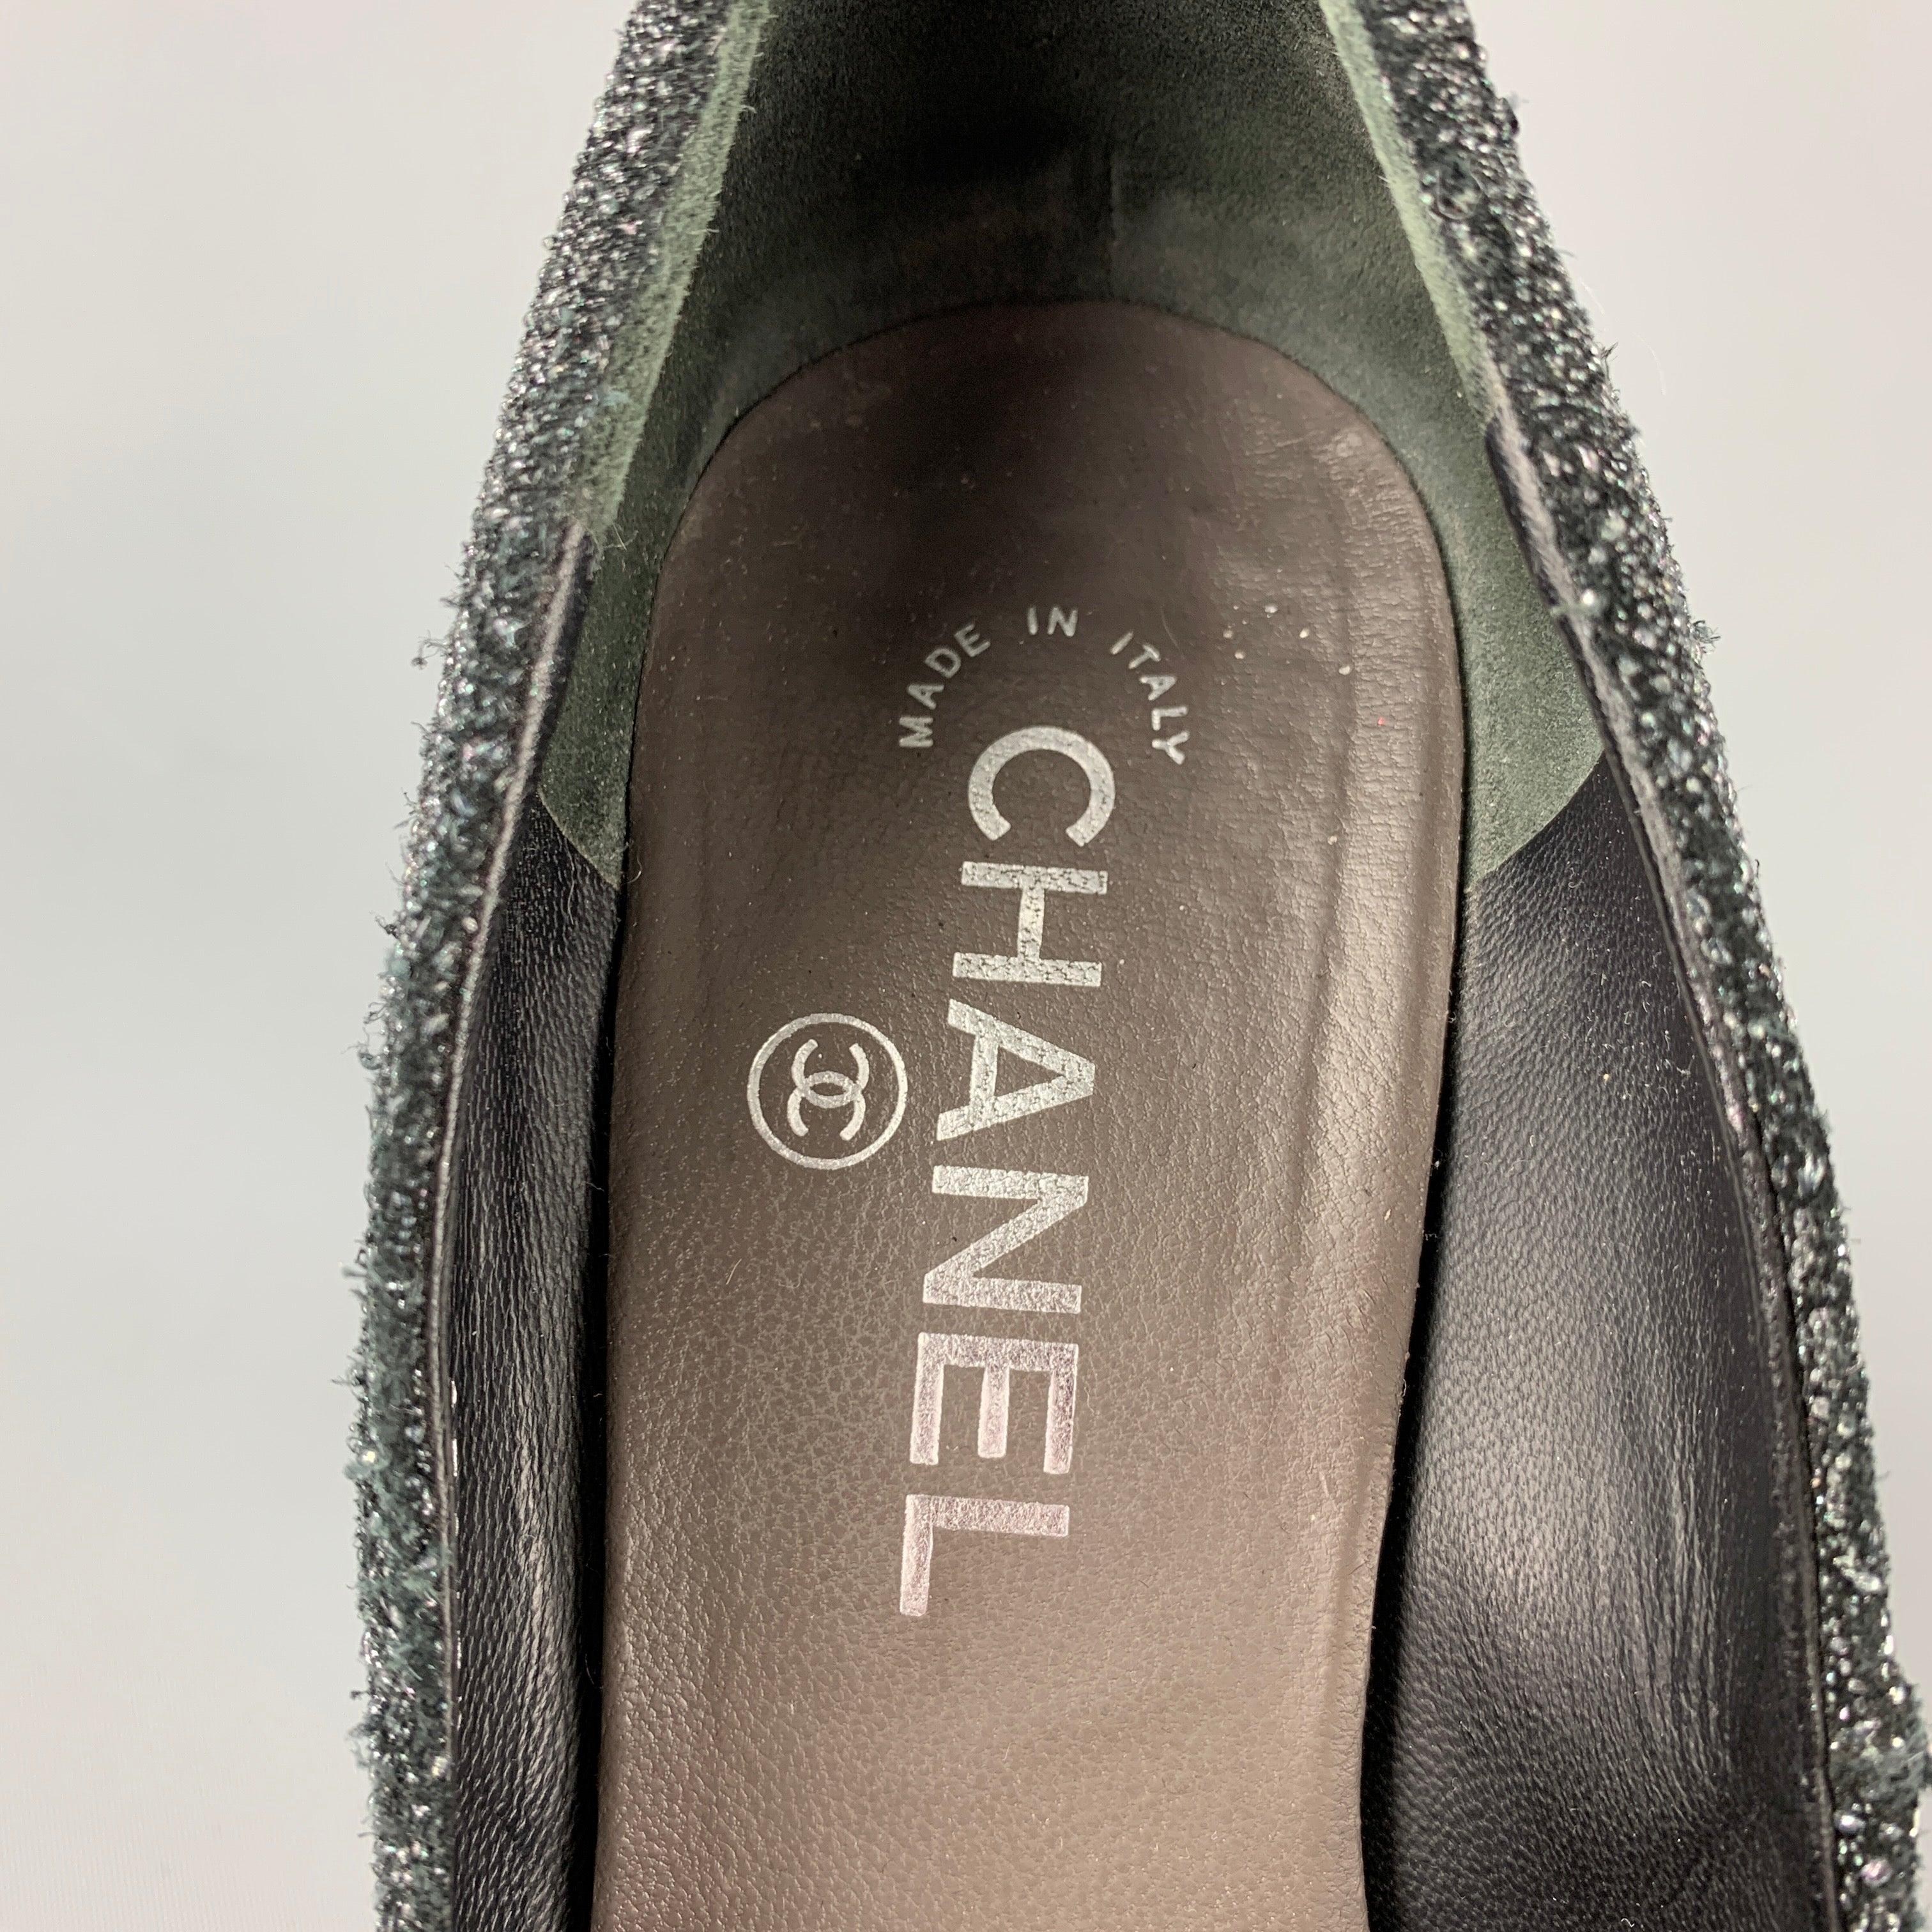 CHANEL Size 7 Charcoal & Grey Sparkle Textured Pumps For Sale 4